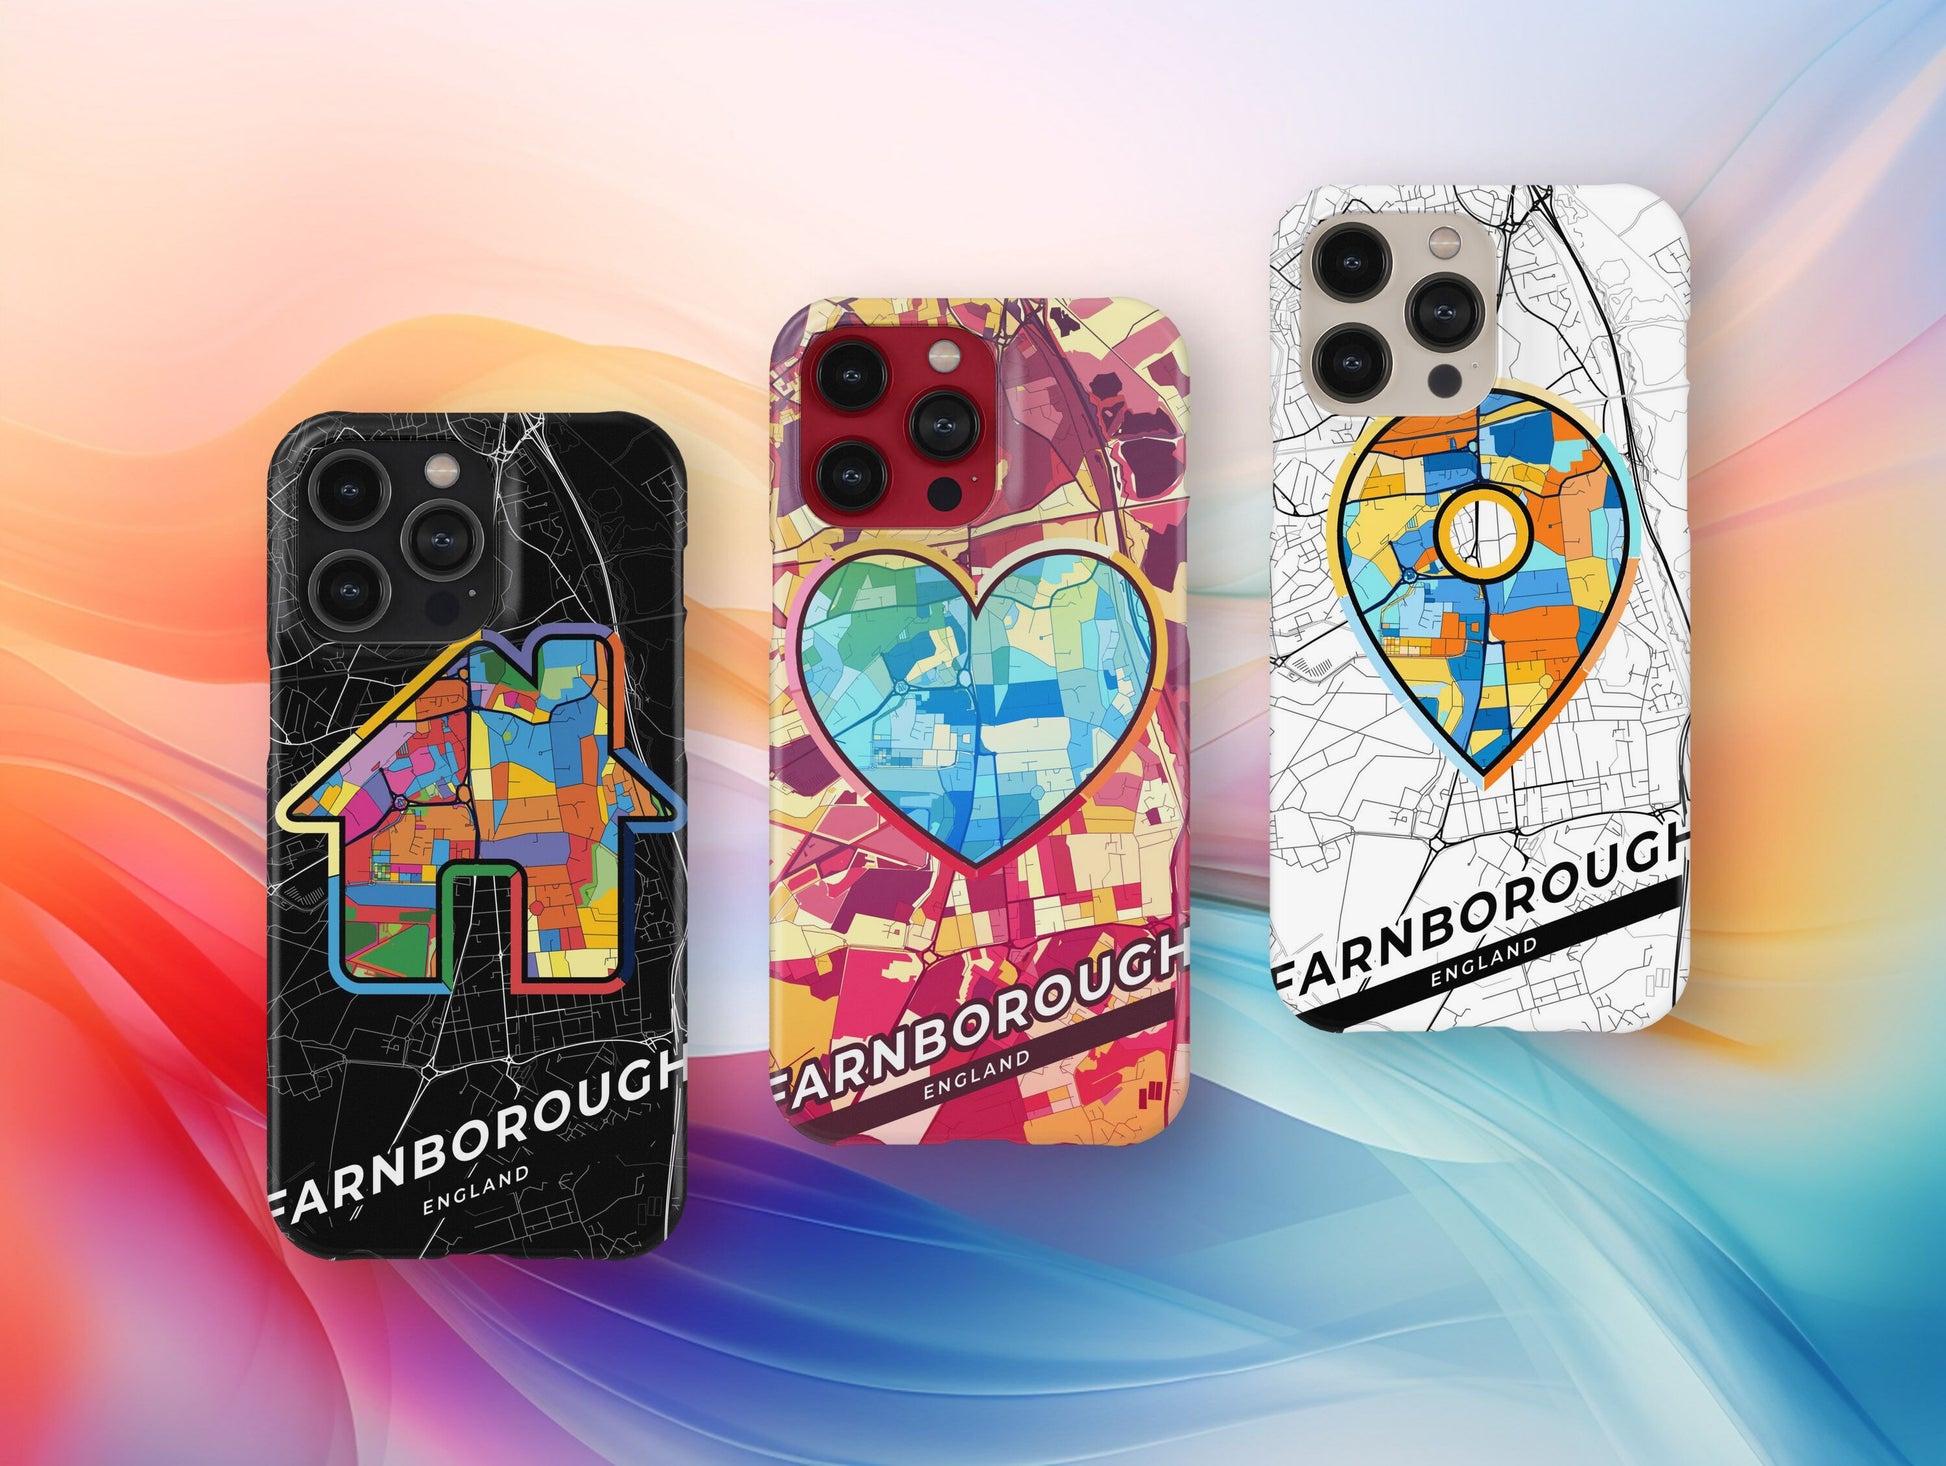 Farnborough England slim phone case with colorful icon. Birthday, wedding or housewarming gift. Couple match cases.